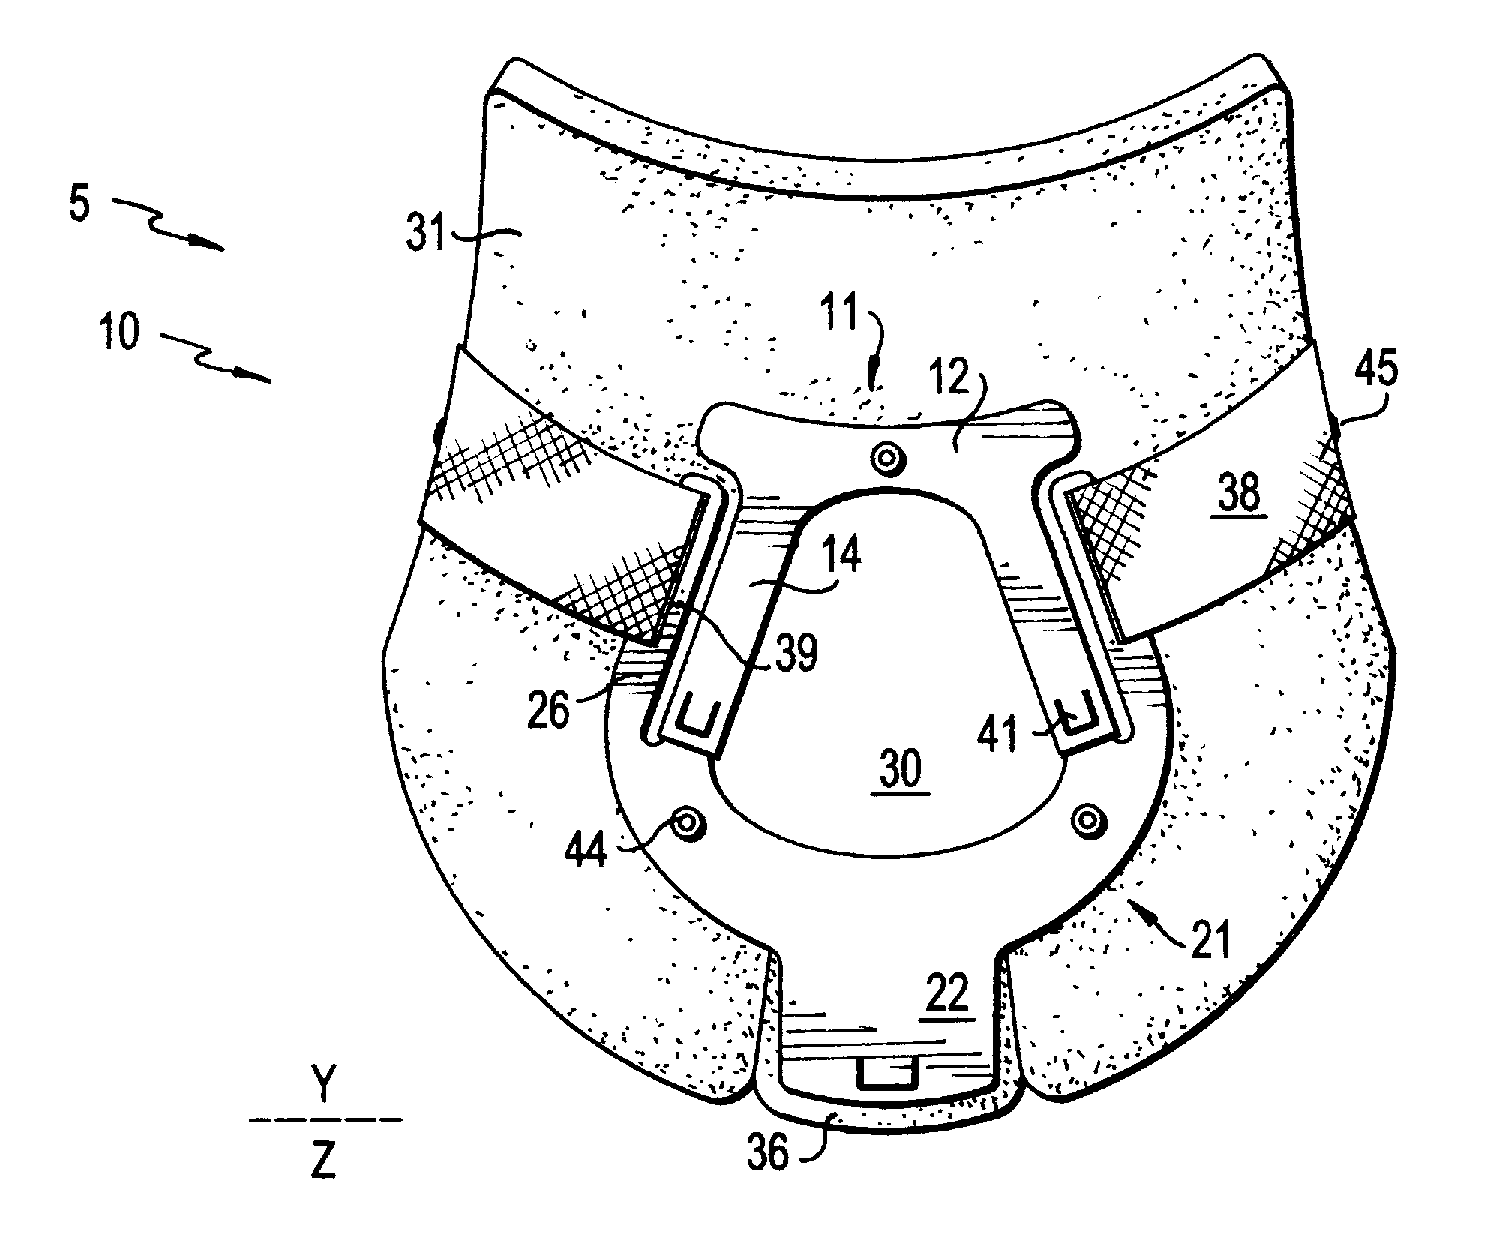 Cervical collar with independent height and circumference adjustability